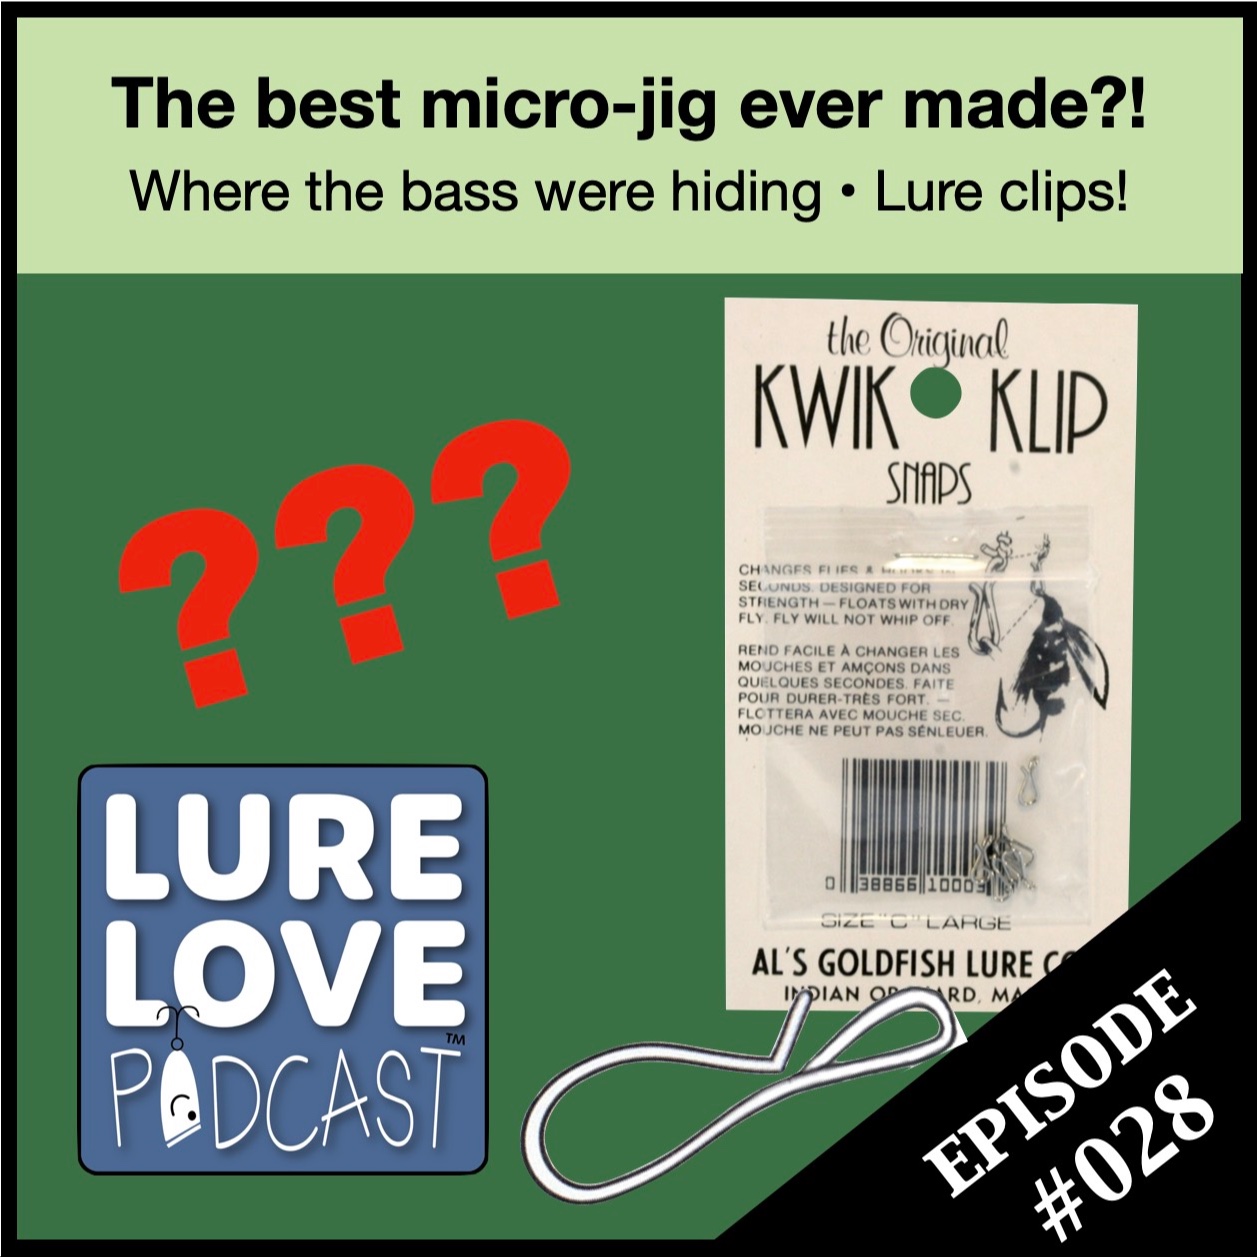 The best micro-jig ever?